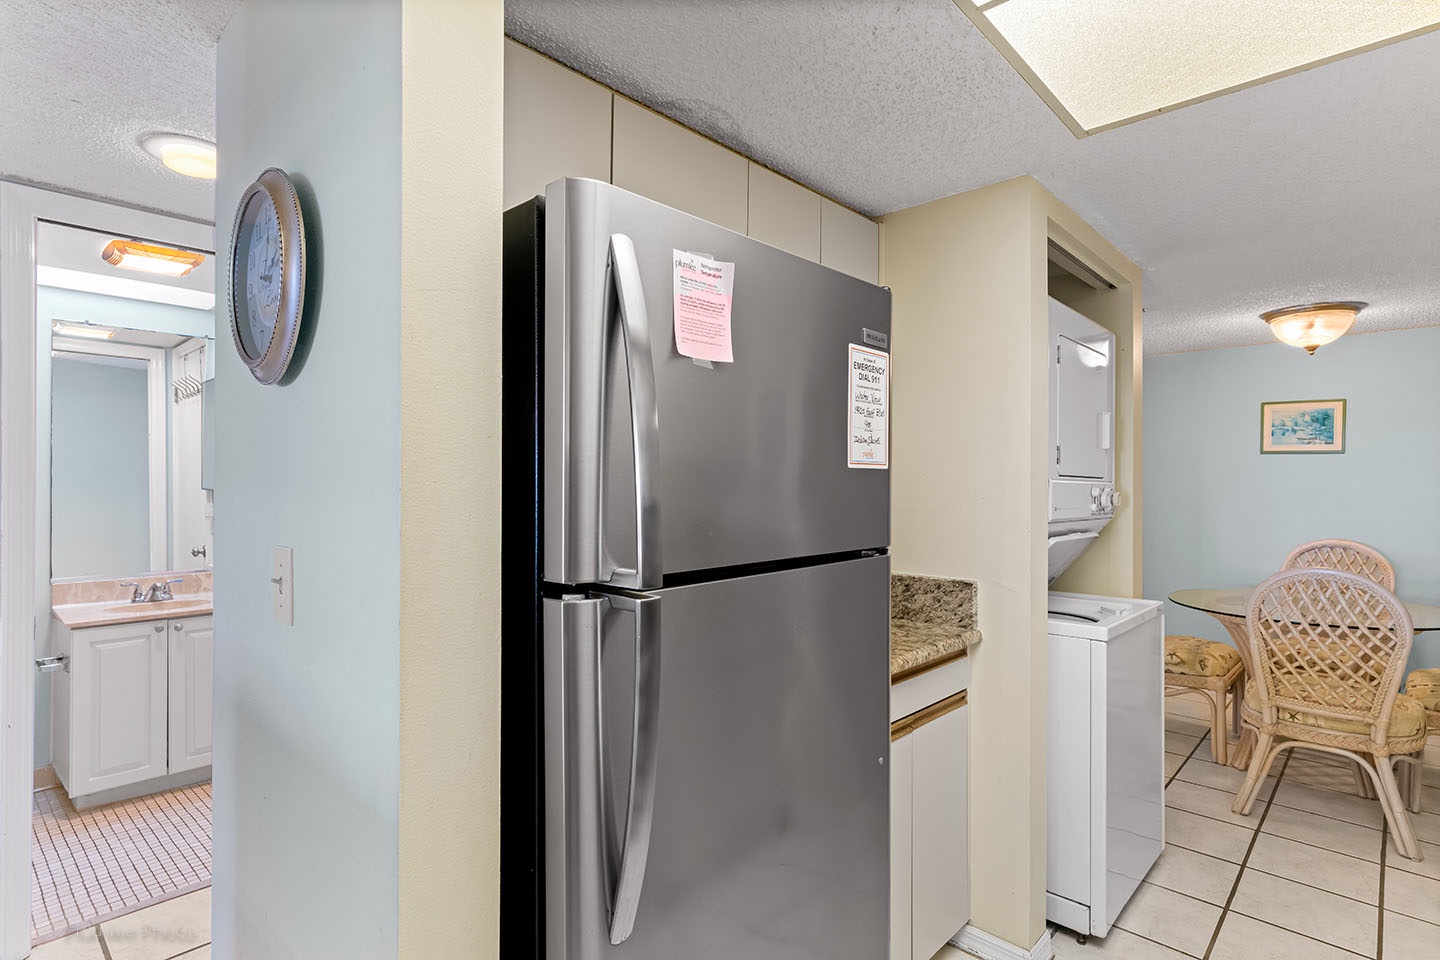 A full size refrigerator and washer/dryer combo.